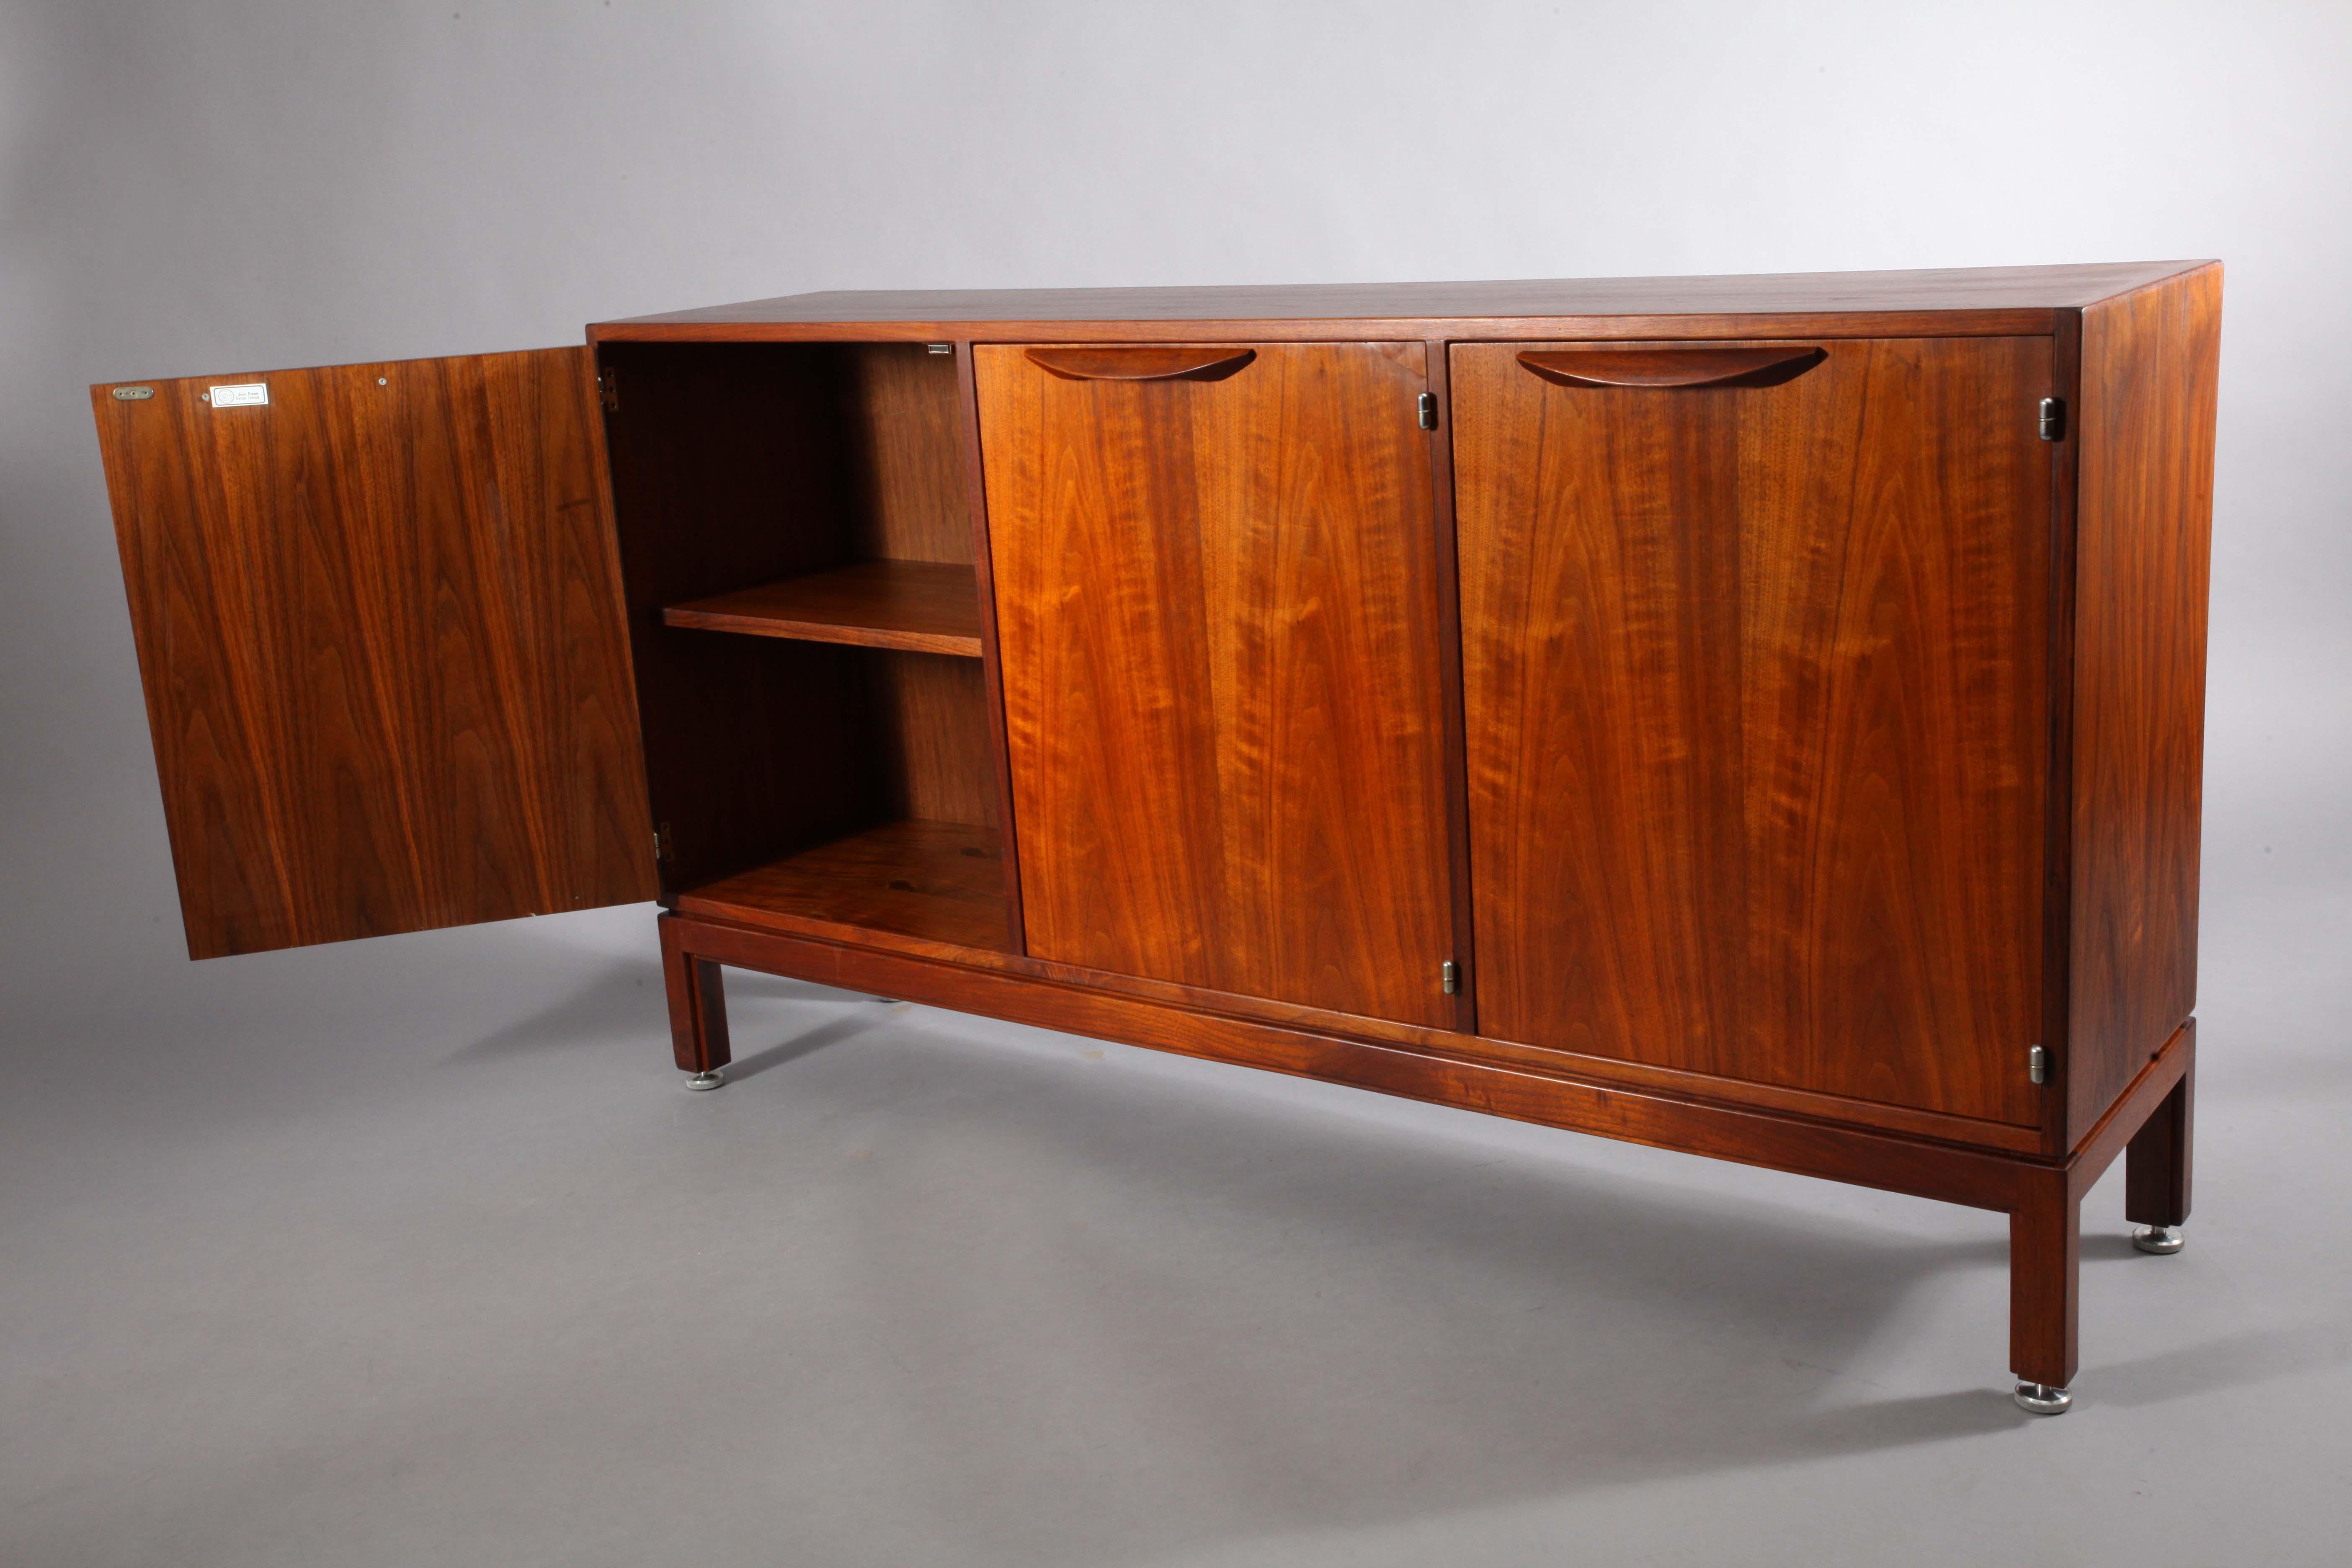 Very nice Danish walnut sideboard from the 1970s. Special design by Jens Risom from Denmark. Excellent for office or dining room purposes.